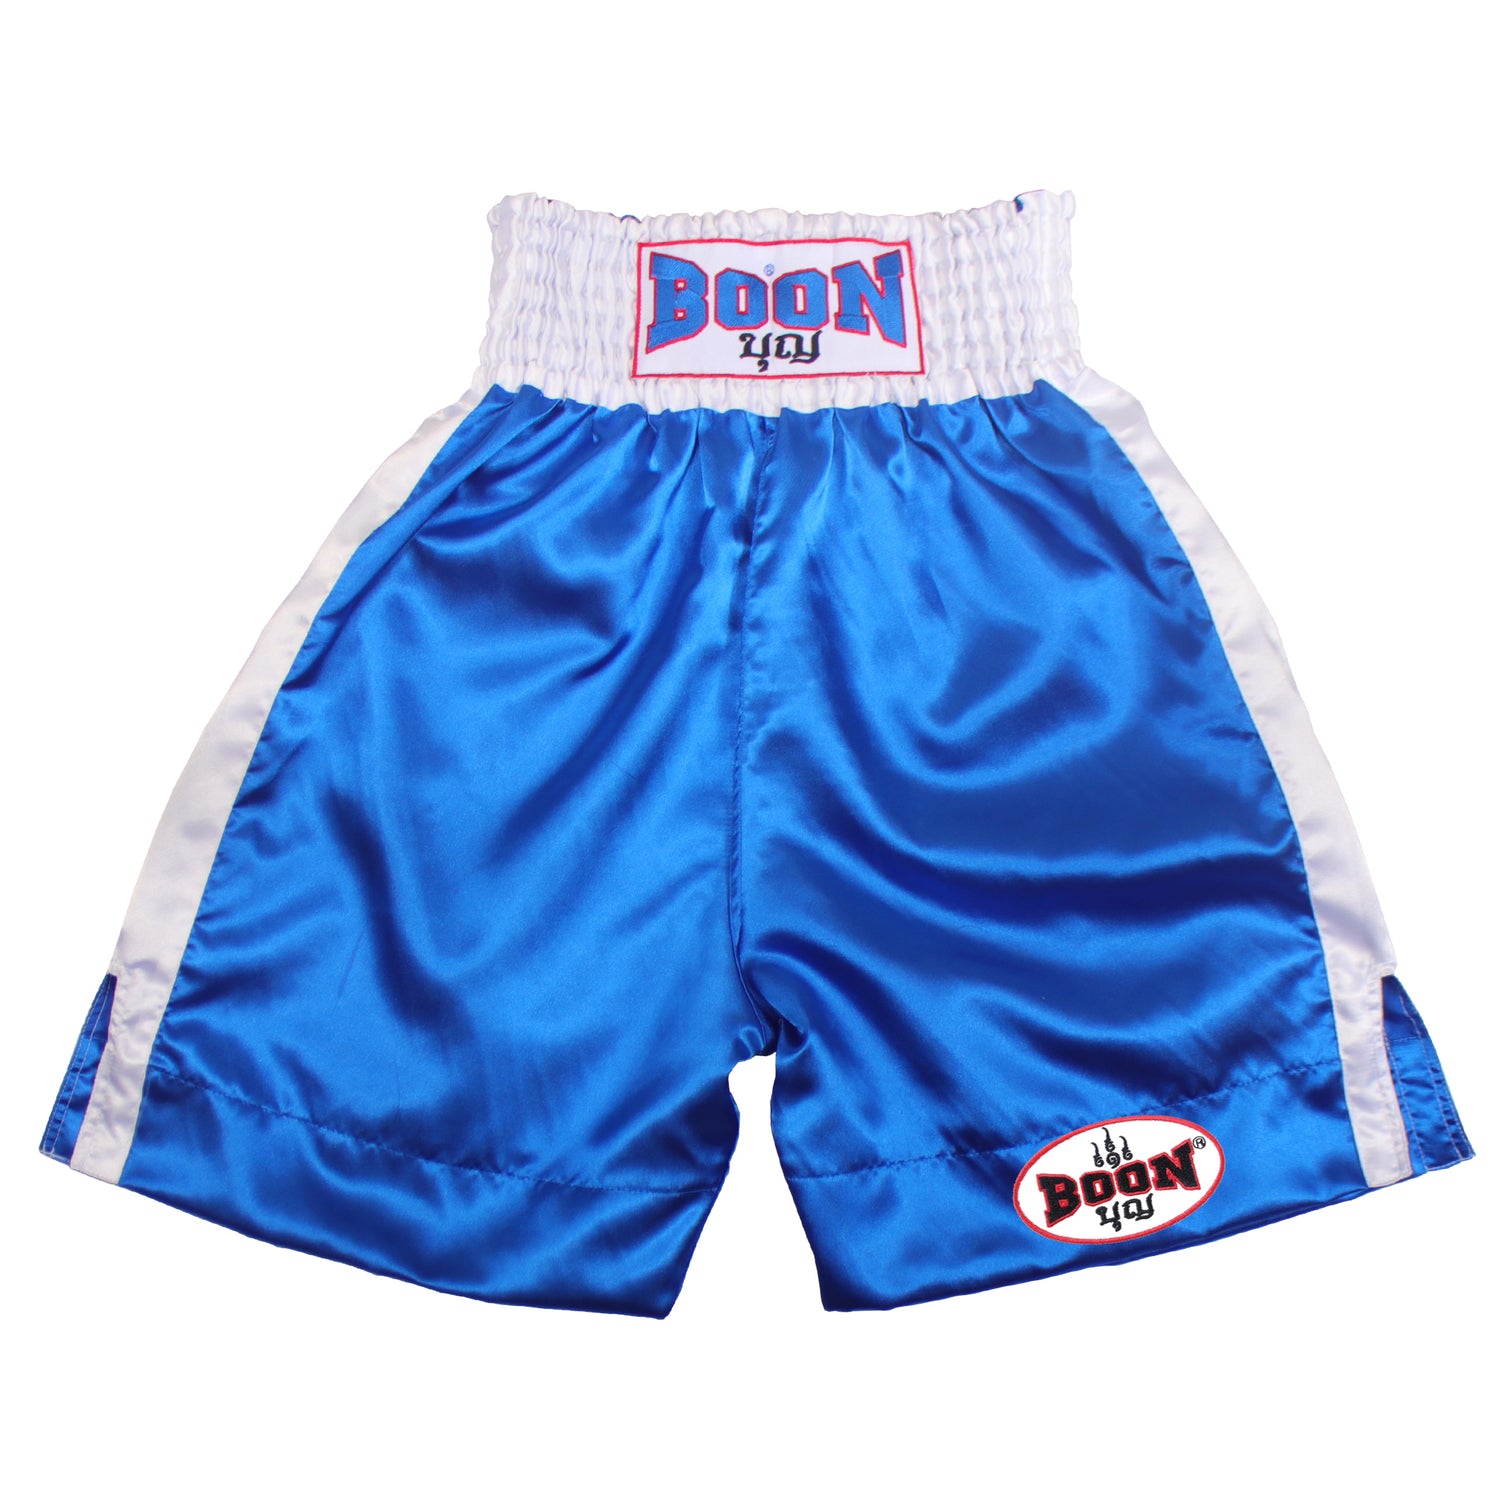 BSBLW Blue & white boxing shorts